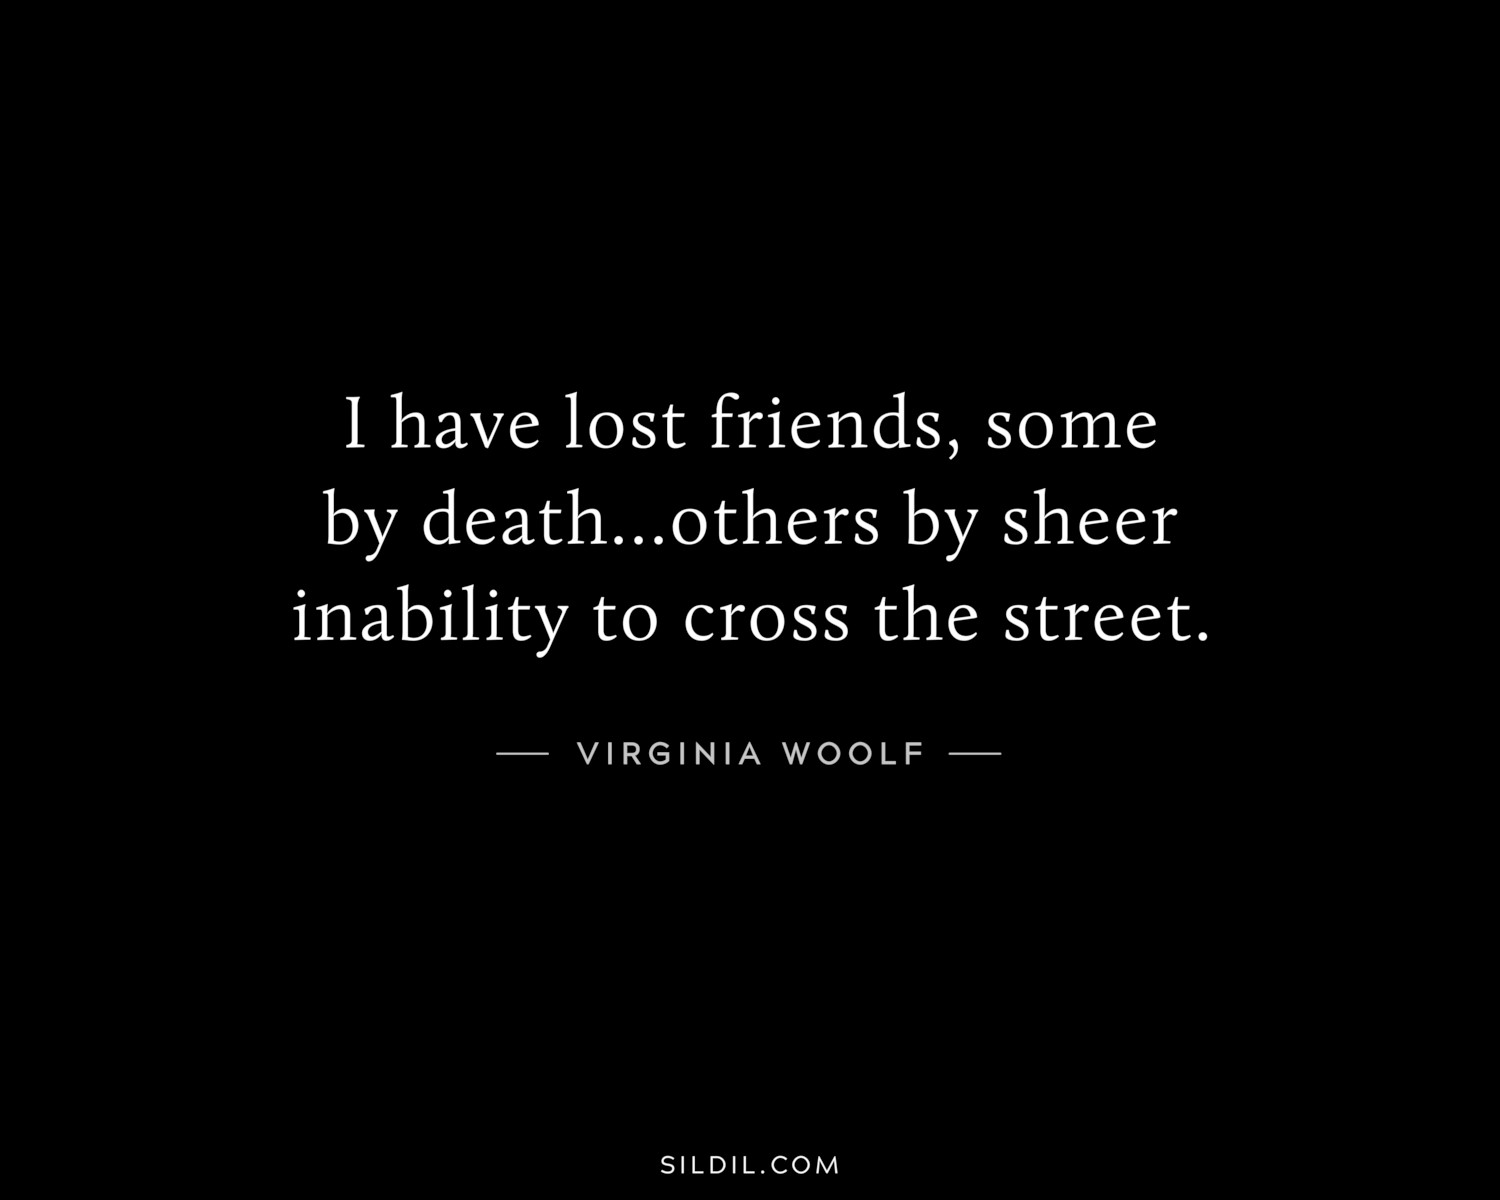 I have lost friends, some by death...others by sheer inability to cross the street.